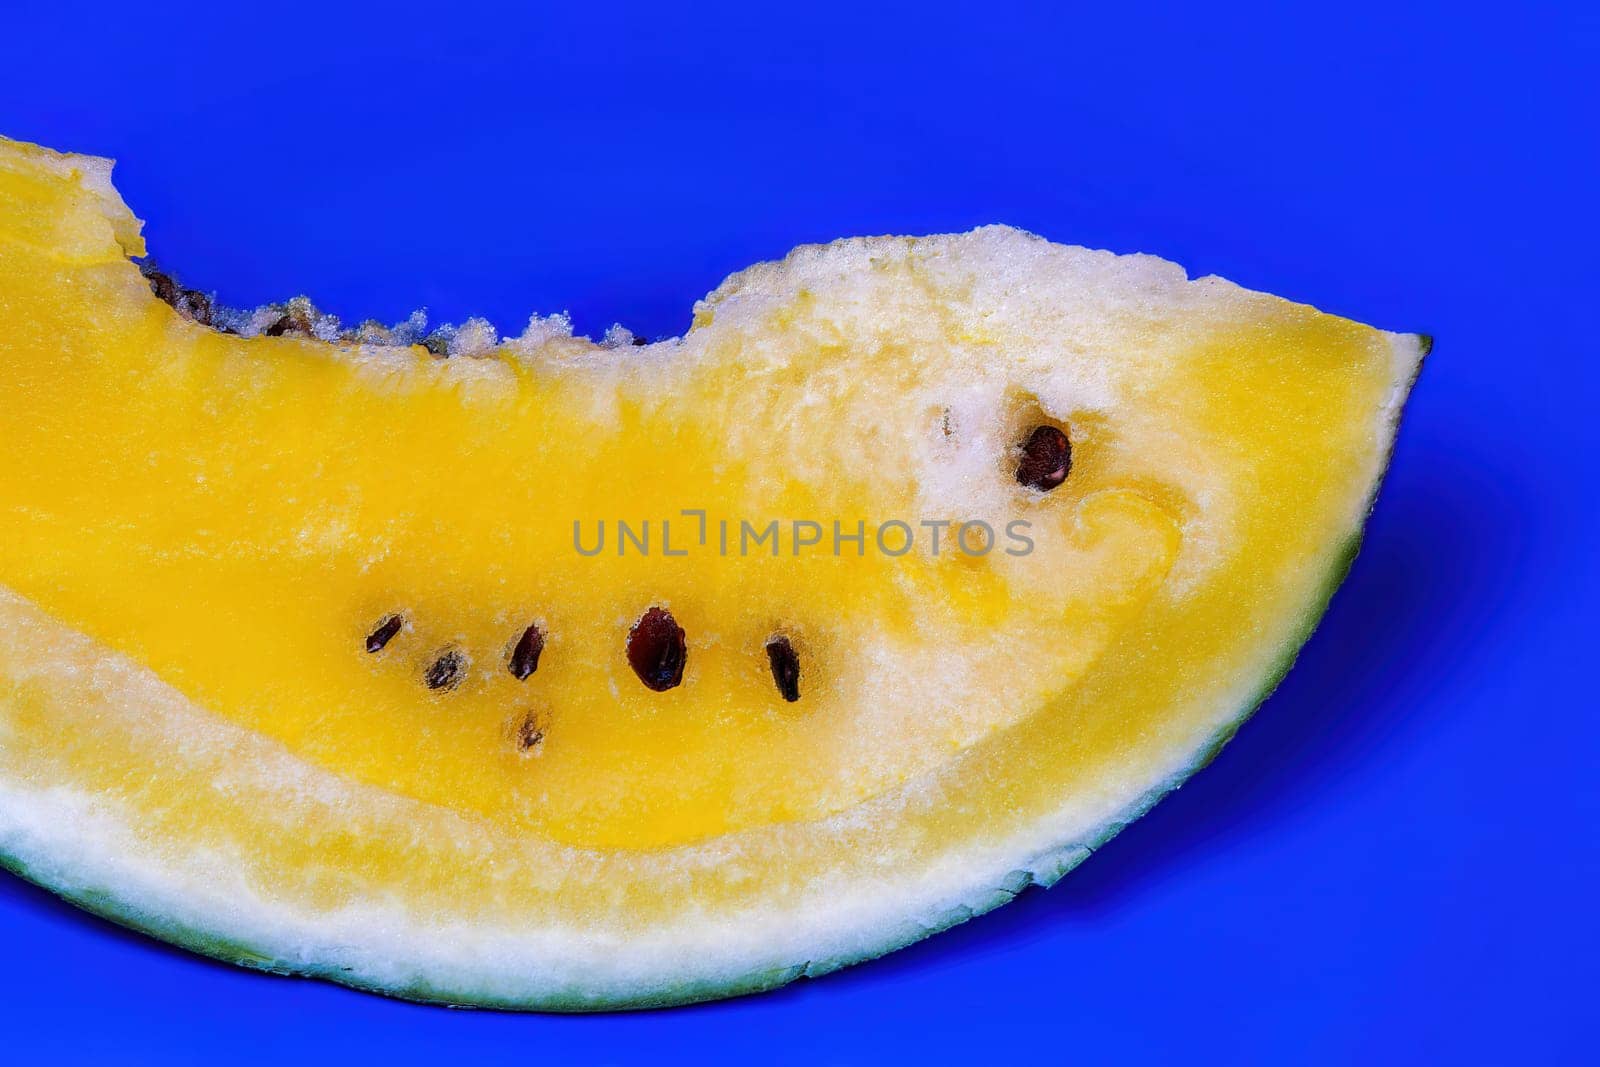 A slice of sweet fresh yellow watermelon served on a blue dish, against colorful background.